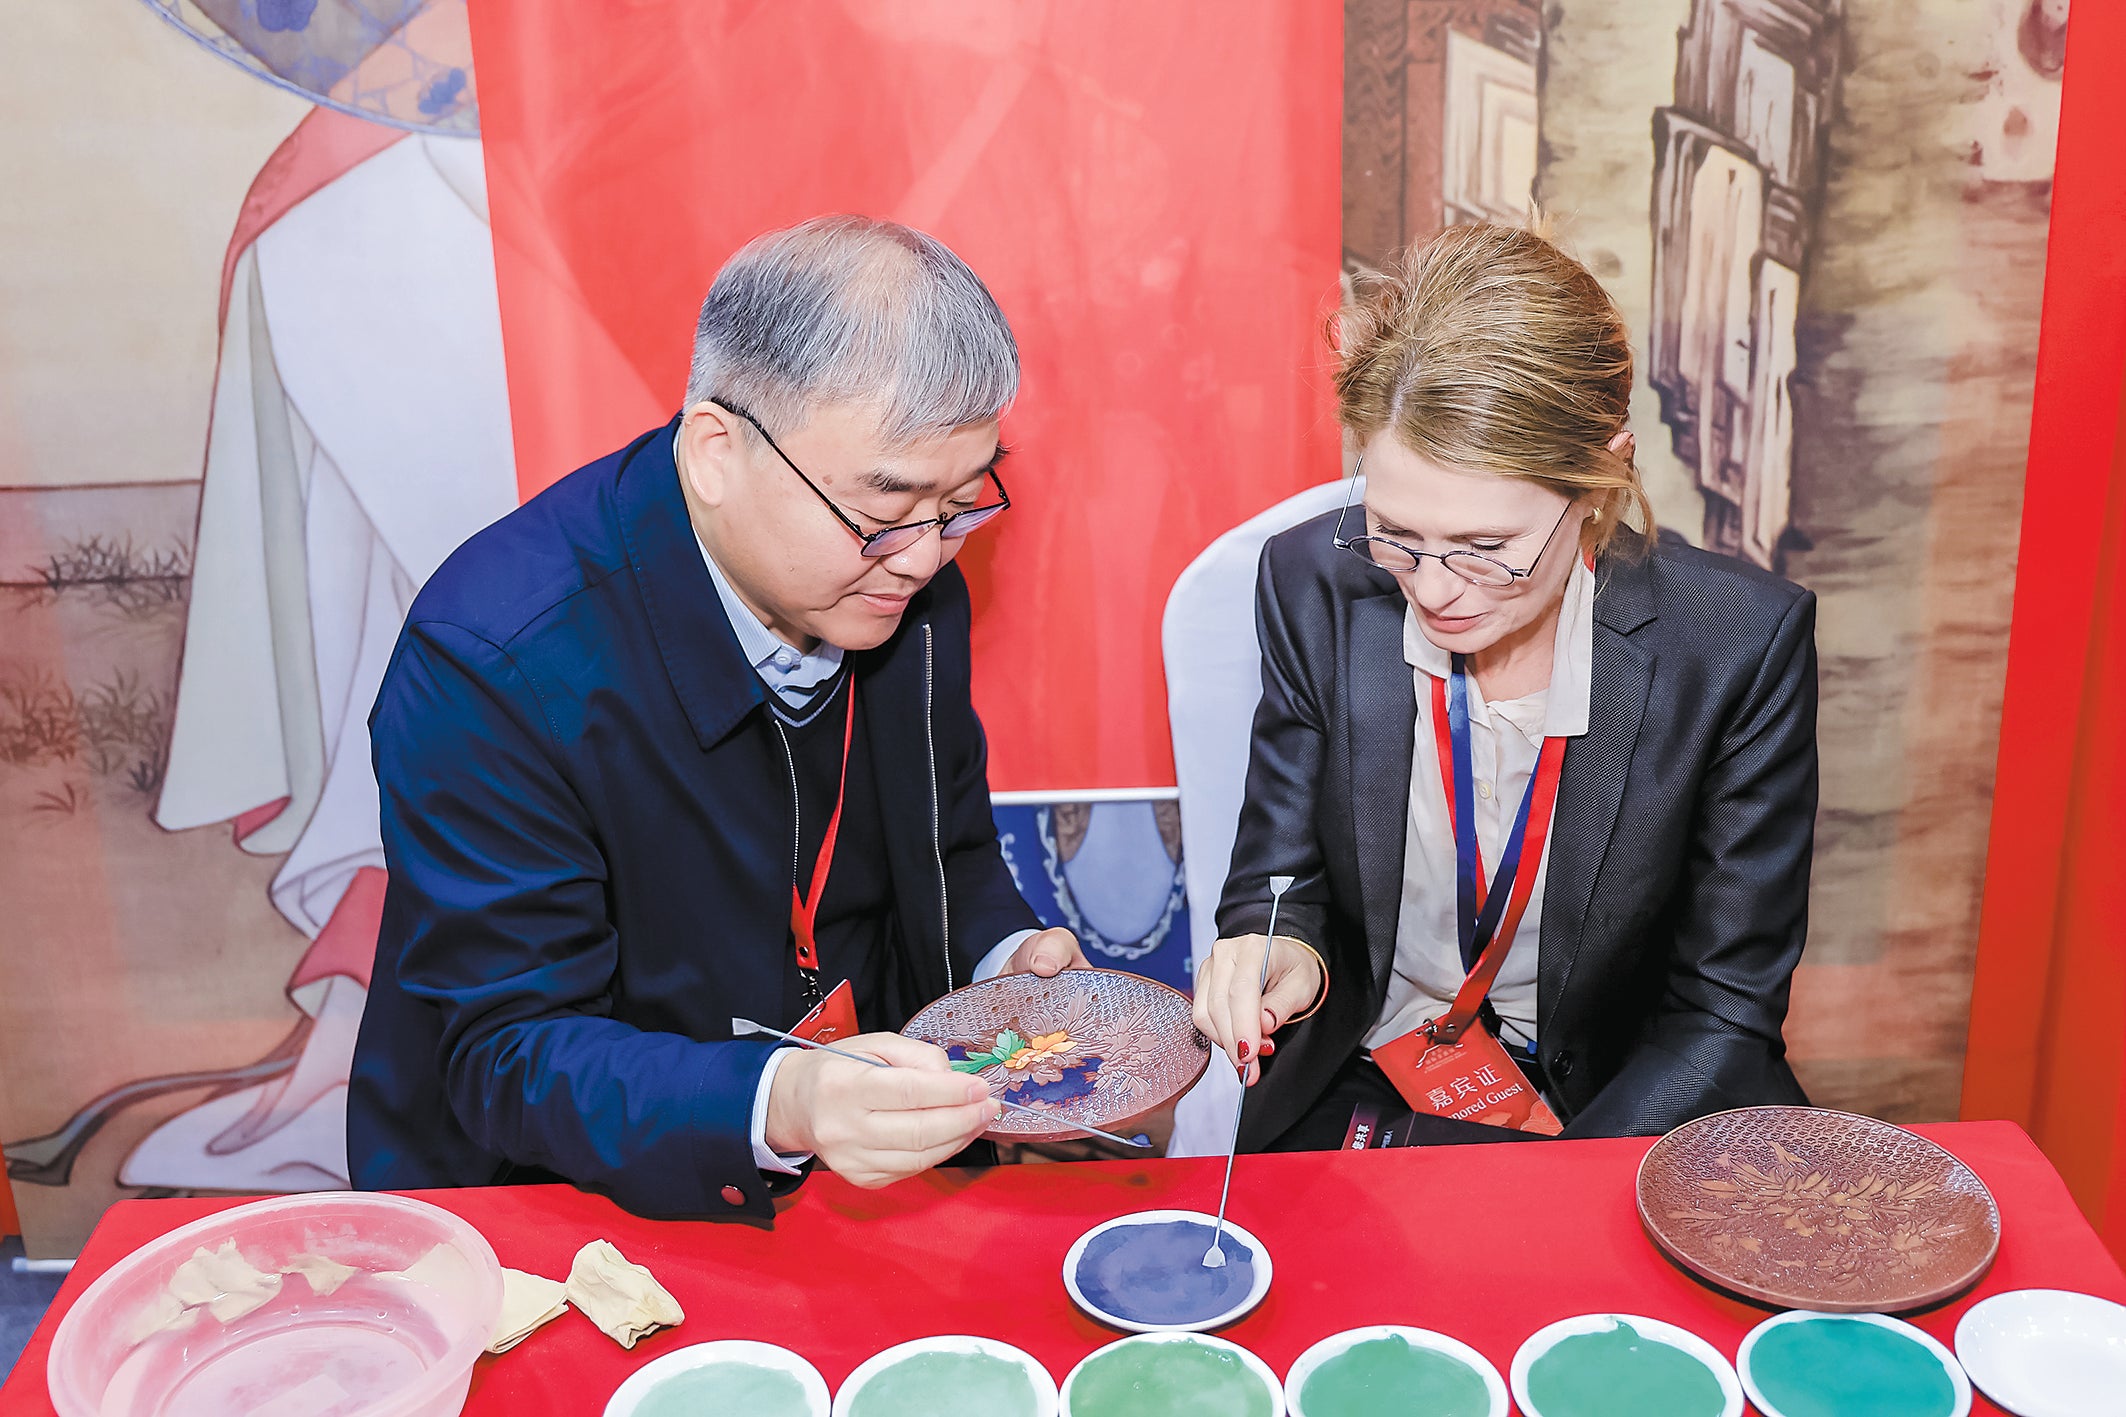 An artist demonstrates cloisonne making to a visitor at the event